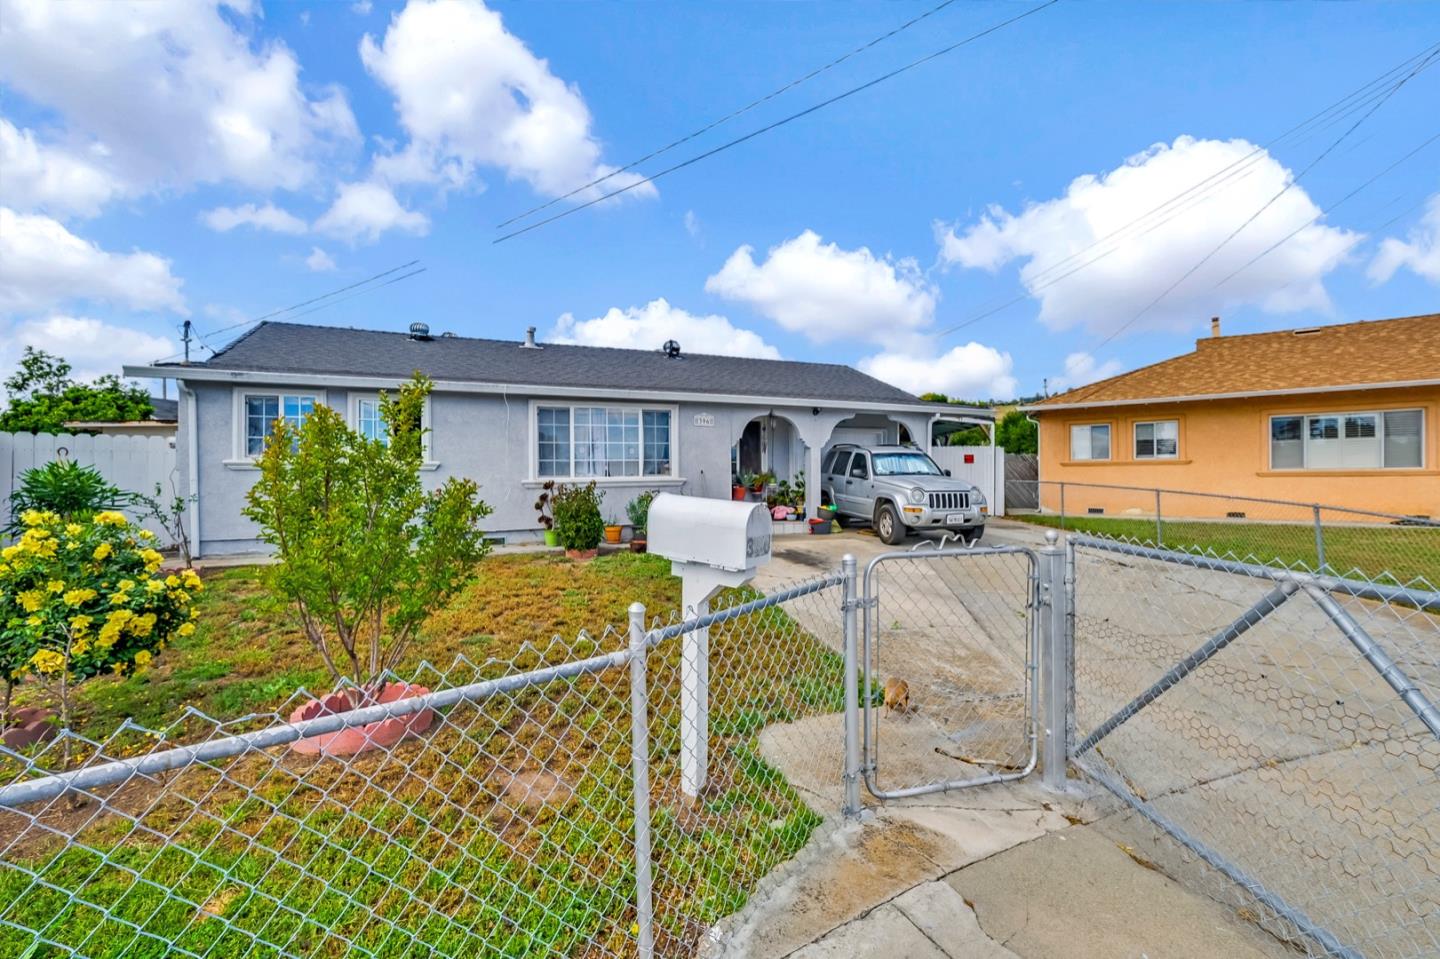 Photo of 396 Thorne Dr in Hayward, CA